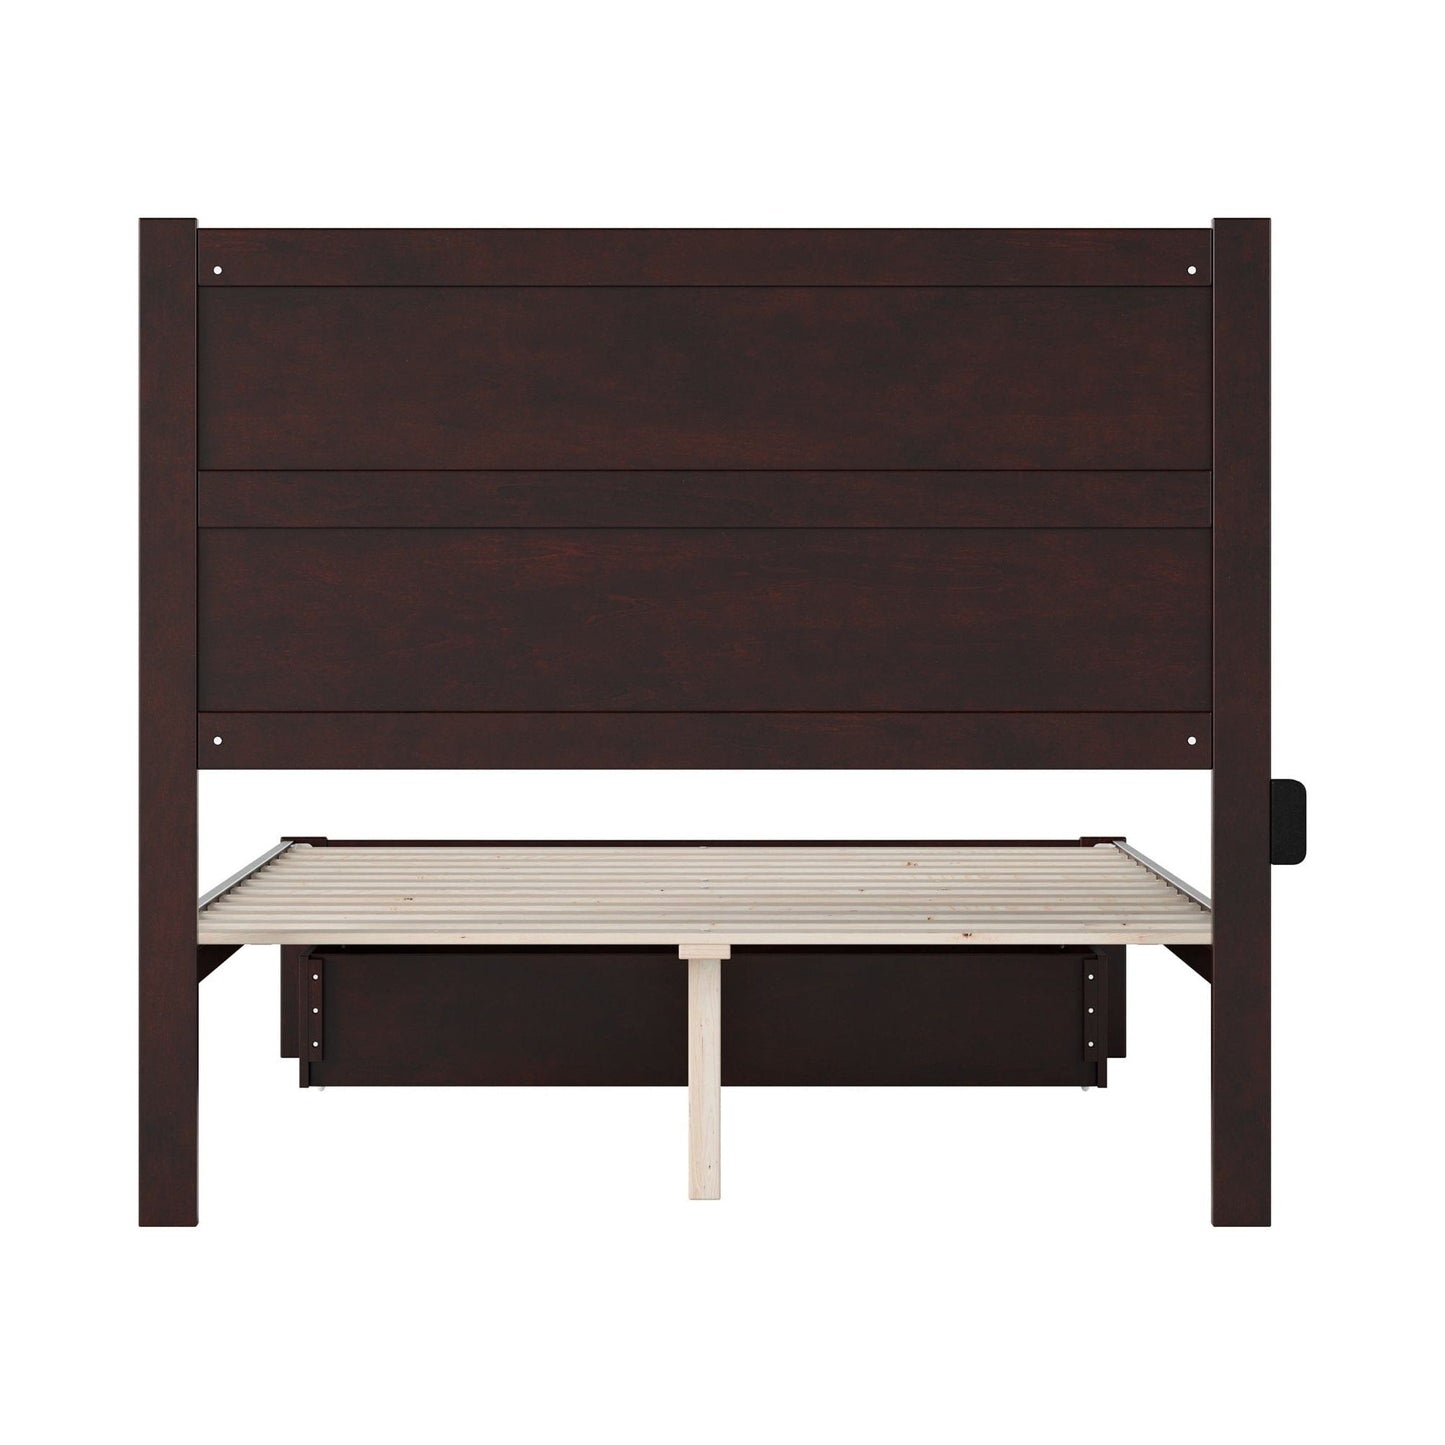 AFI Furnishings NoHo Full Bed with Foot Drawer in Espresso AG9112331